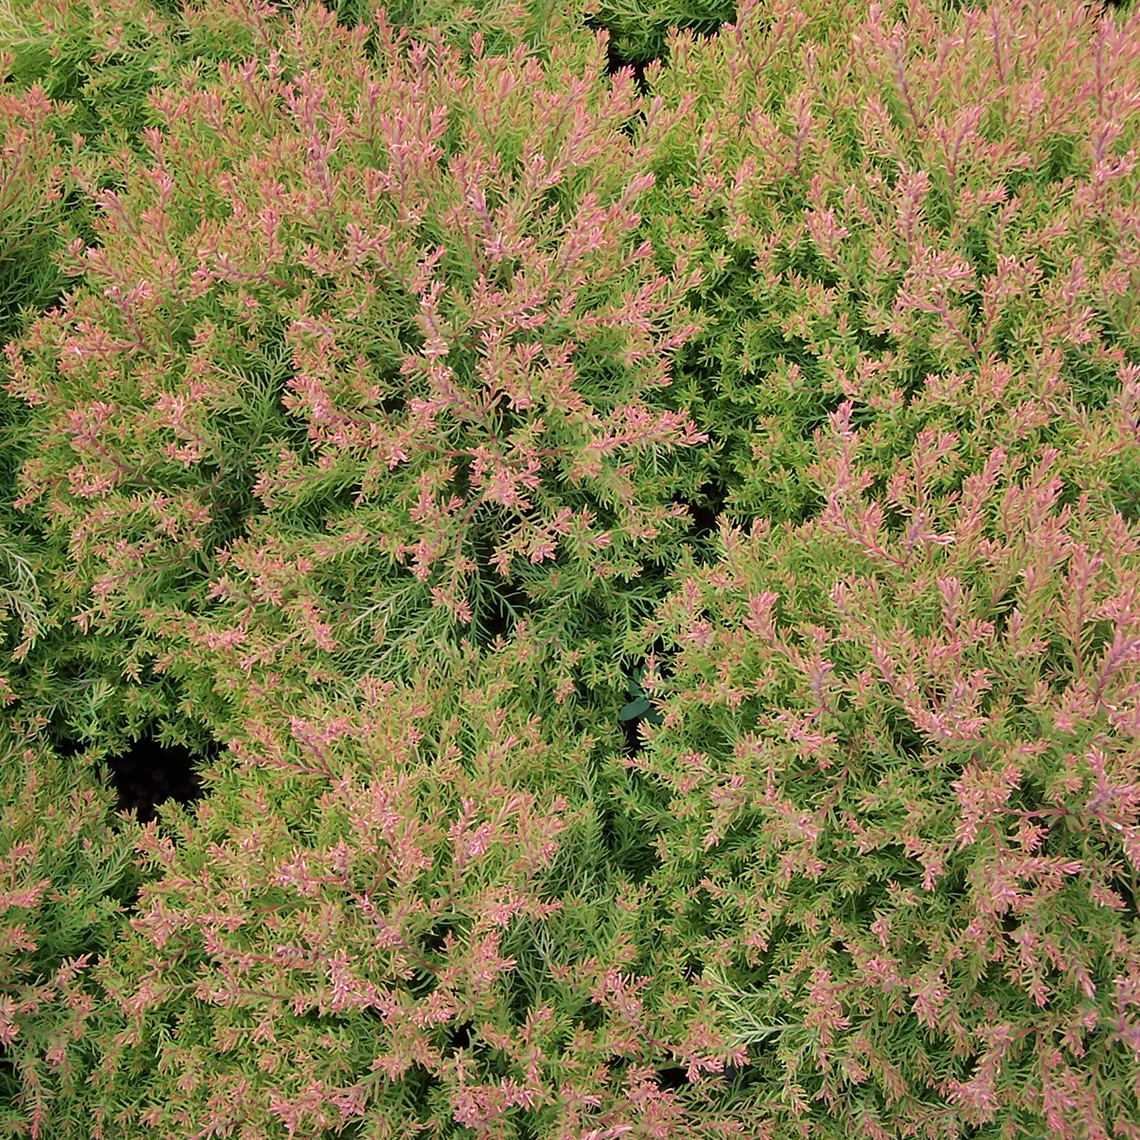 A closeup of the evergreen red yellow and green foliage of Fire Chief arborvitae